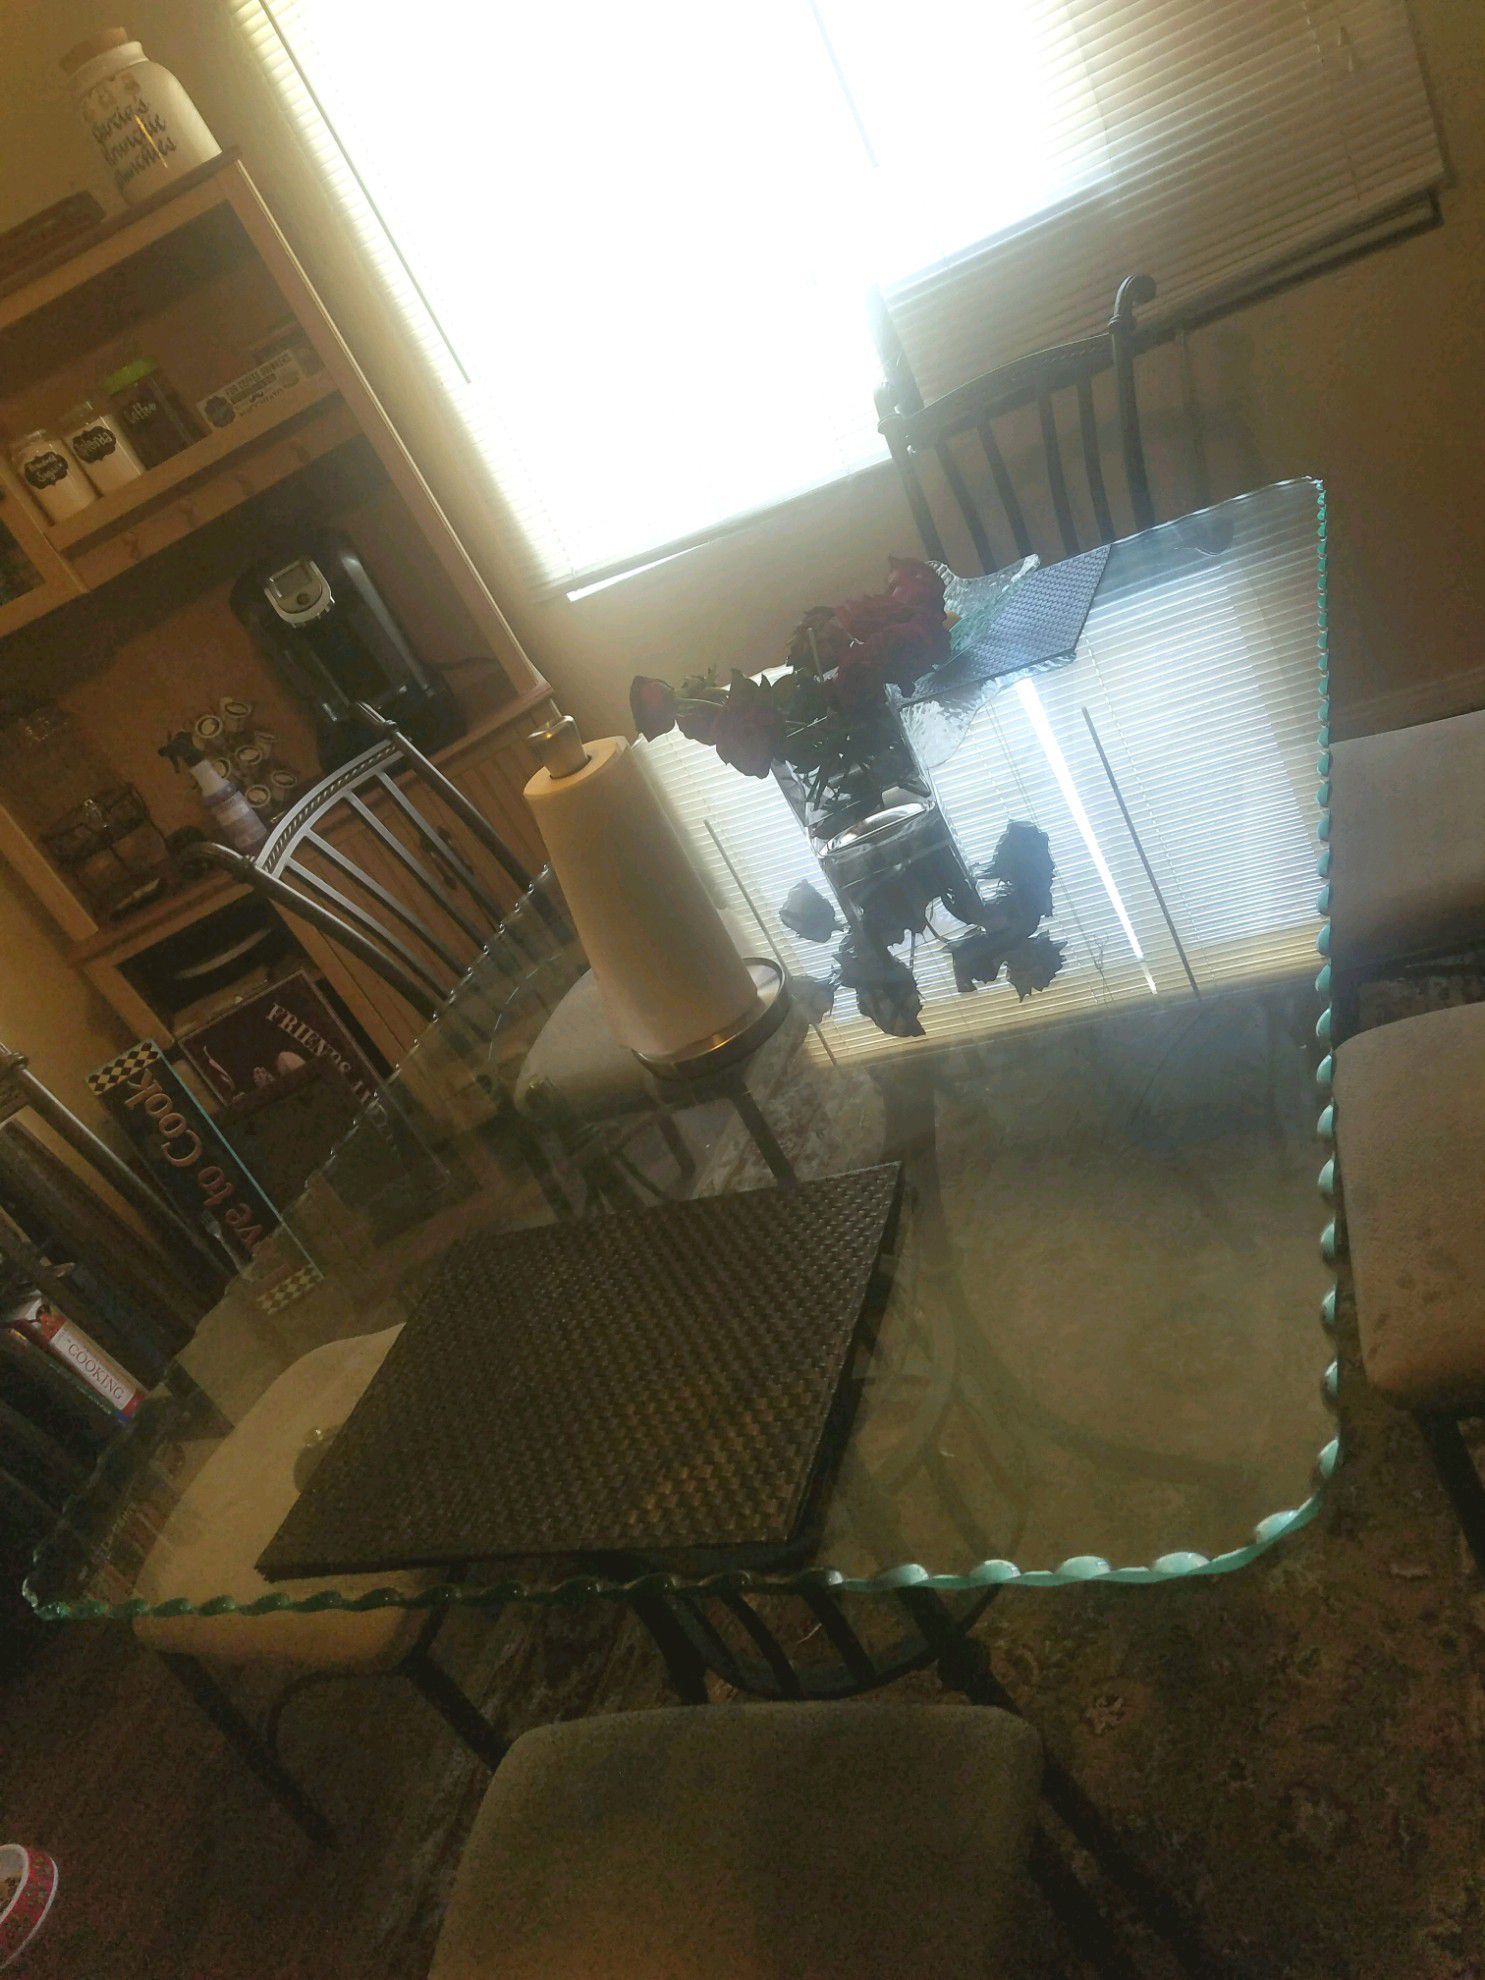 6-Seat Glass & Cast Iron Dining Room Table With FREE CHAIRS...!!